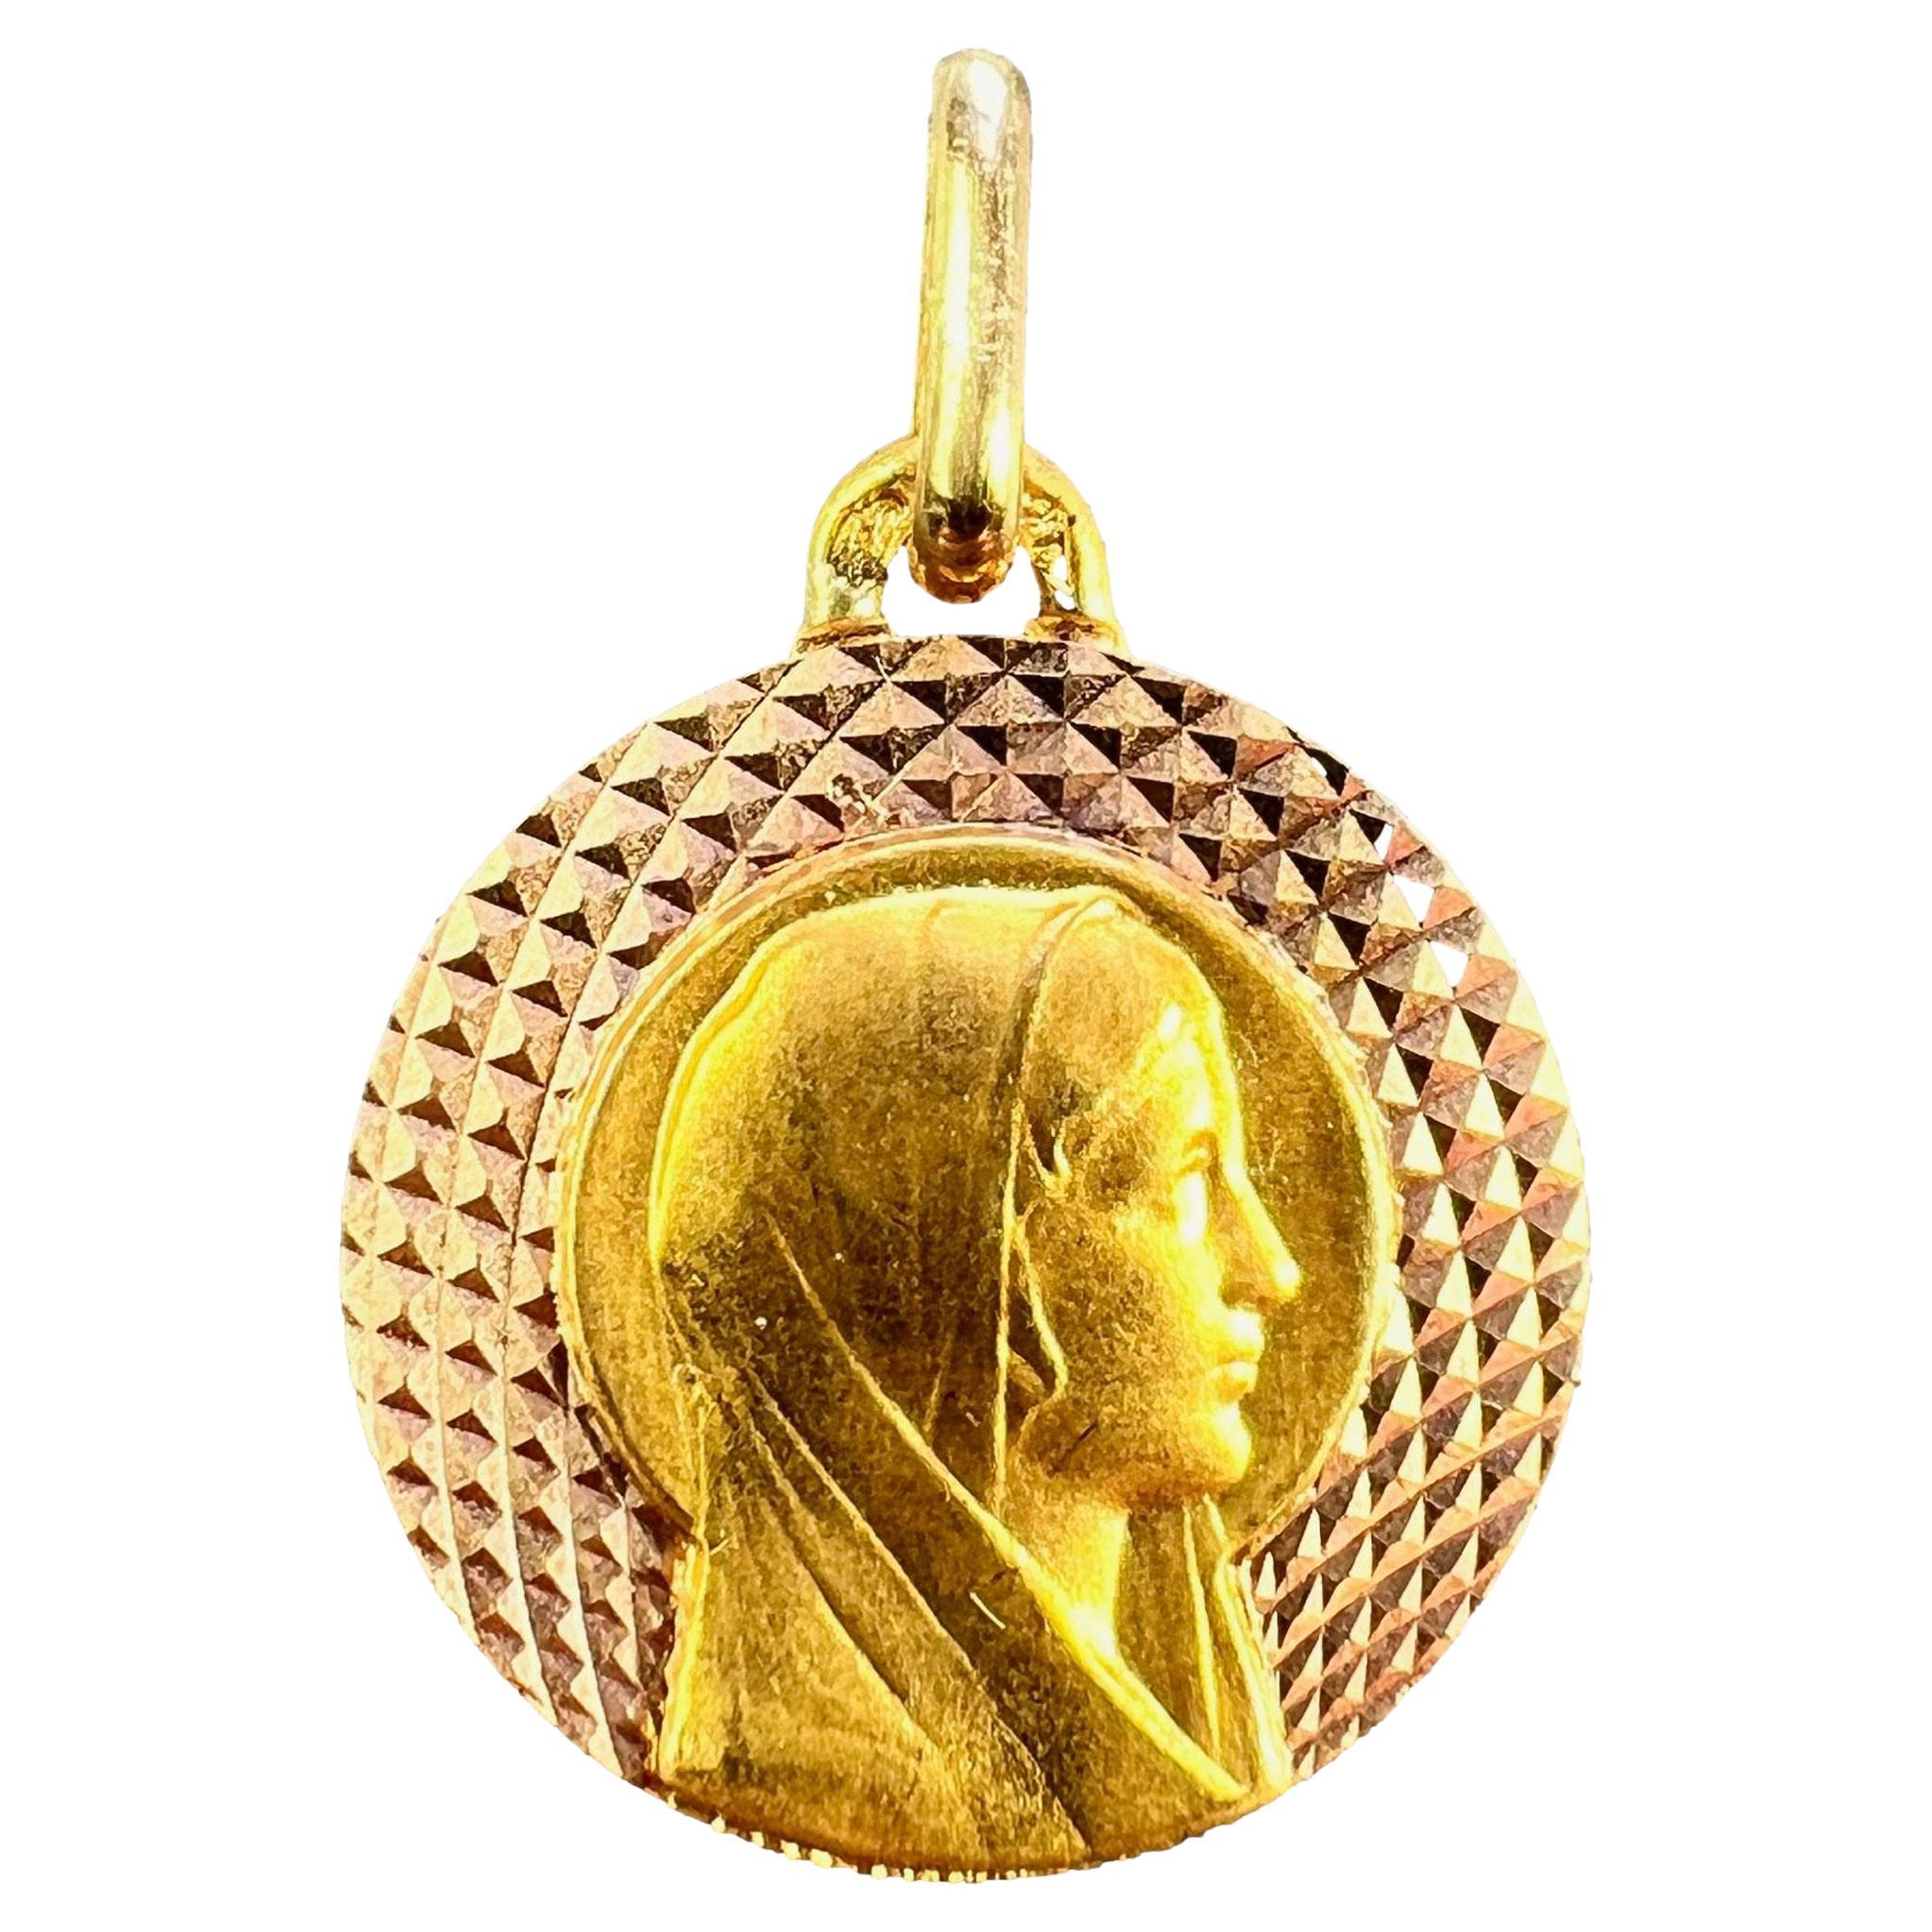 French Augis Religious Virgin Mary 18K Yellow Rose Gold Medal Pendant For Sale